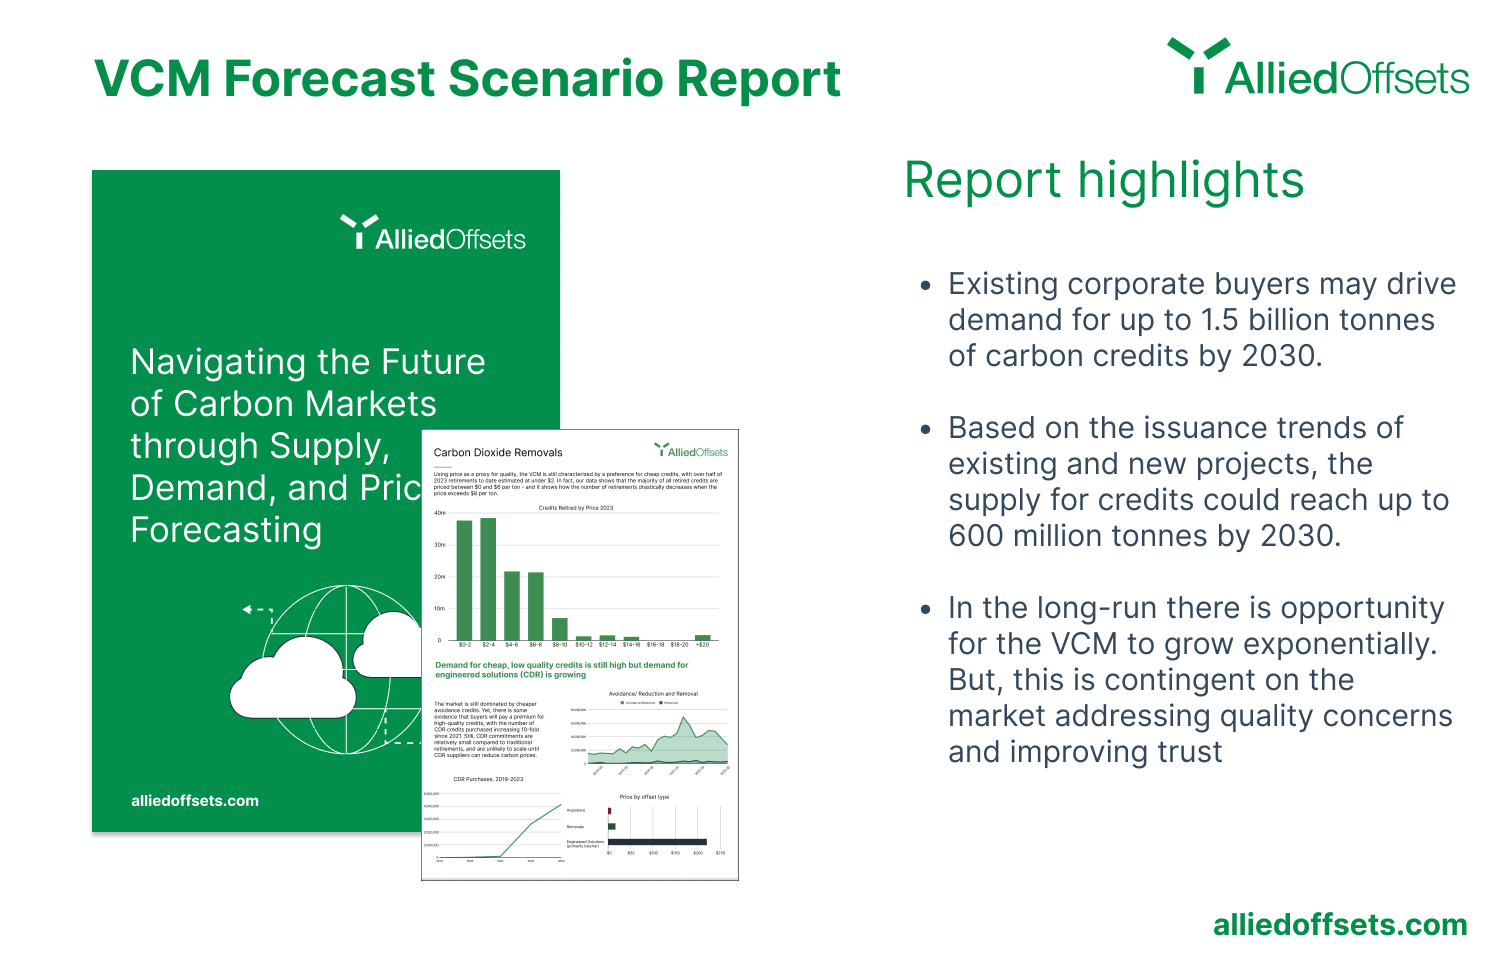 AlliedOffsets forecast predict supply for credits could reach up to 600 million tonnes by 2030